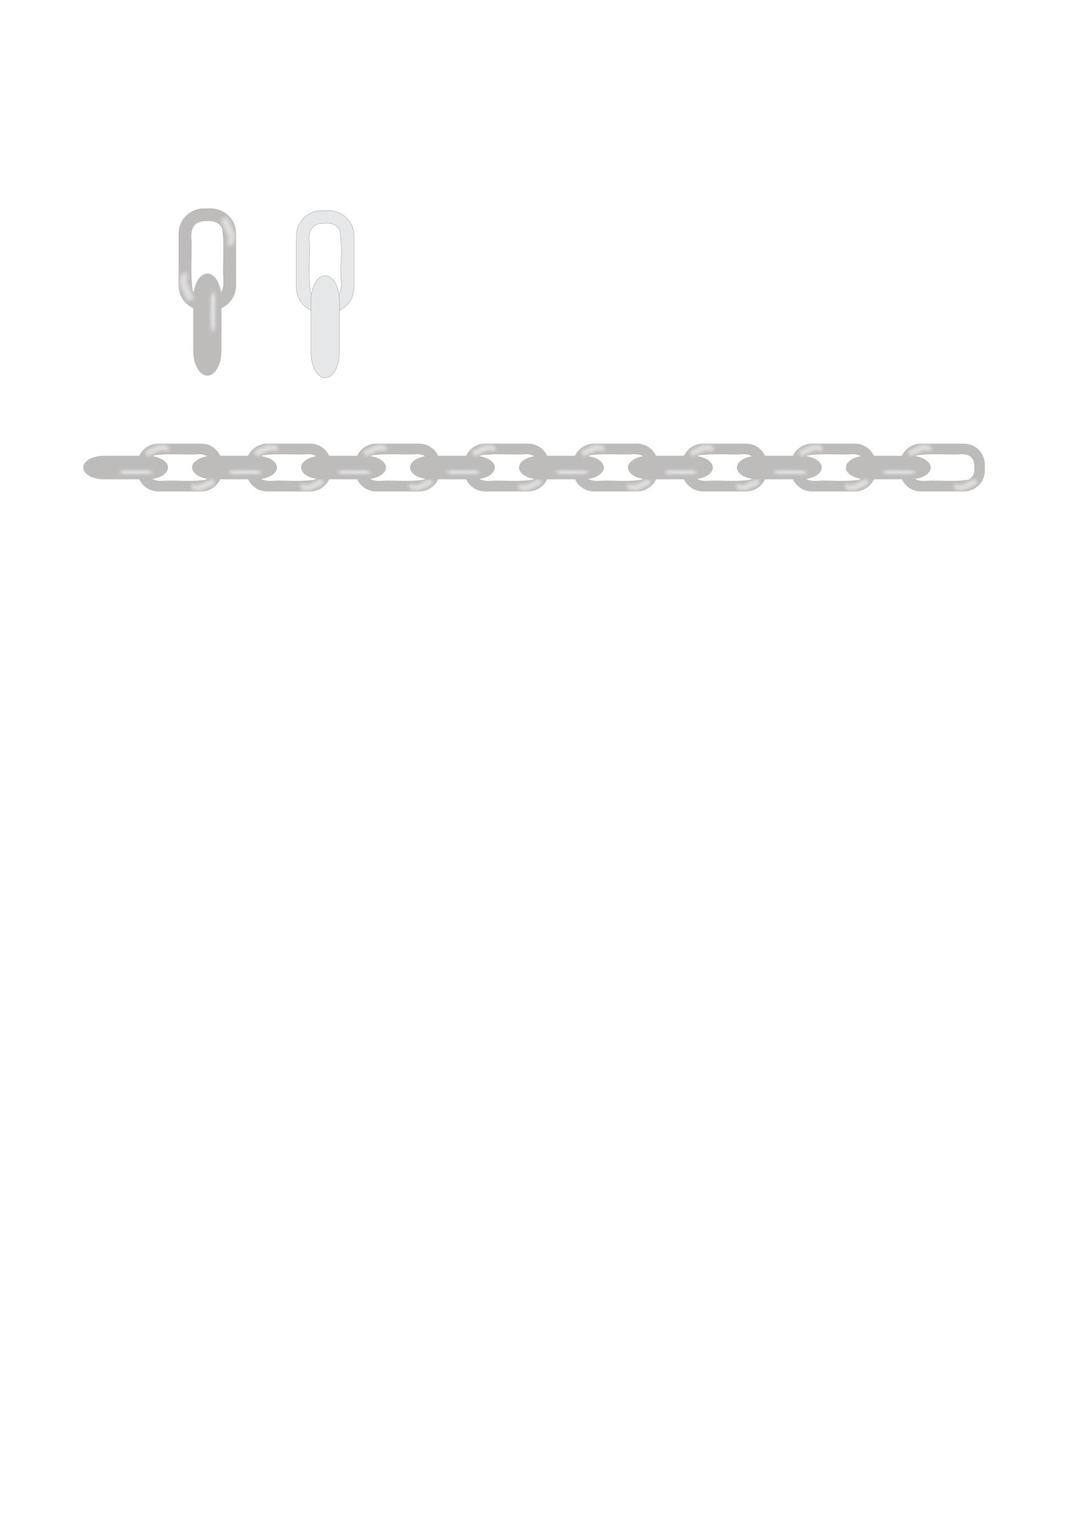 Simple Metallic chain png transparent